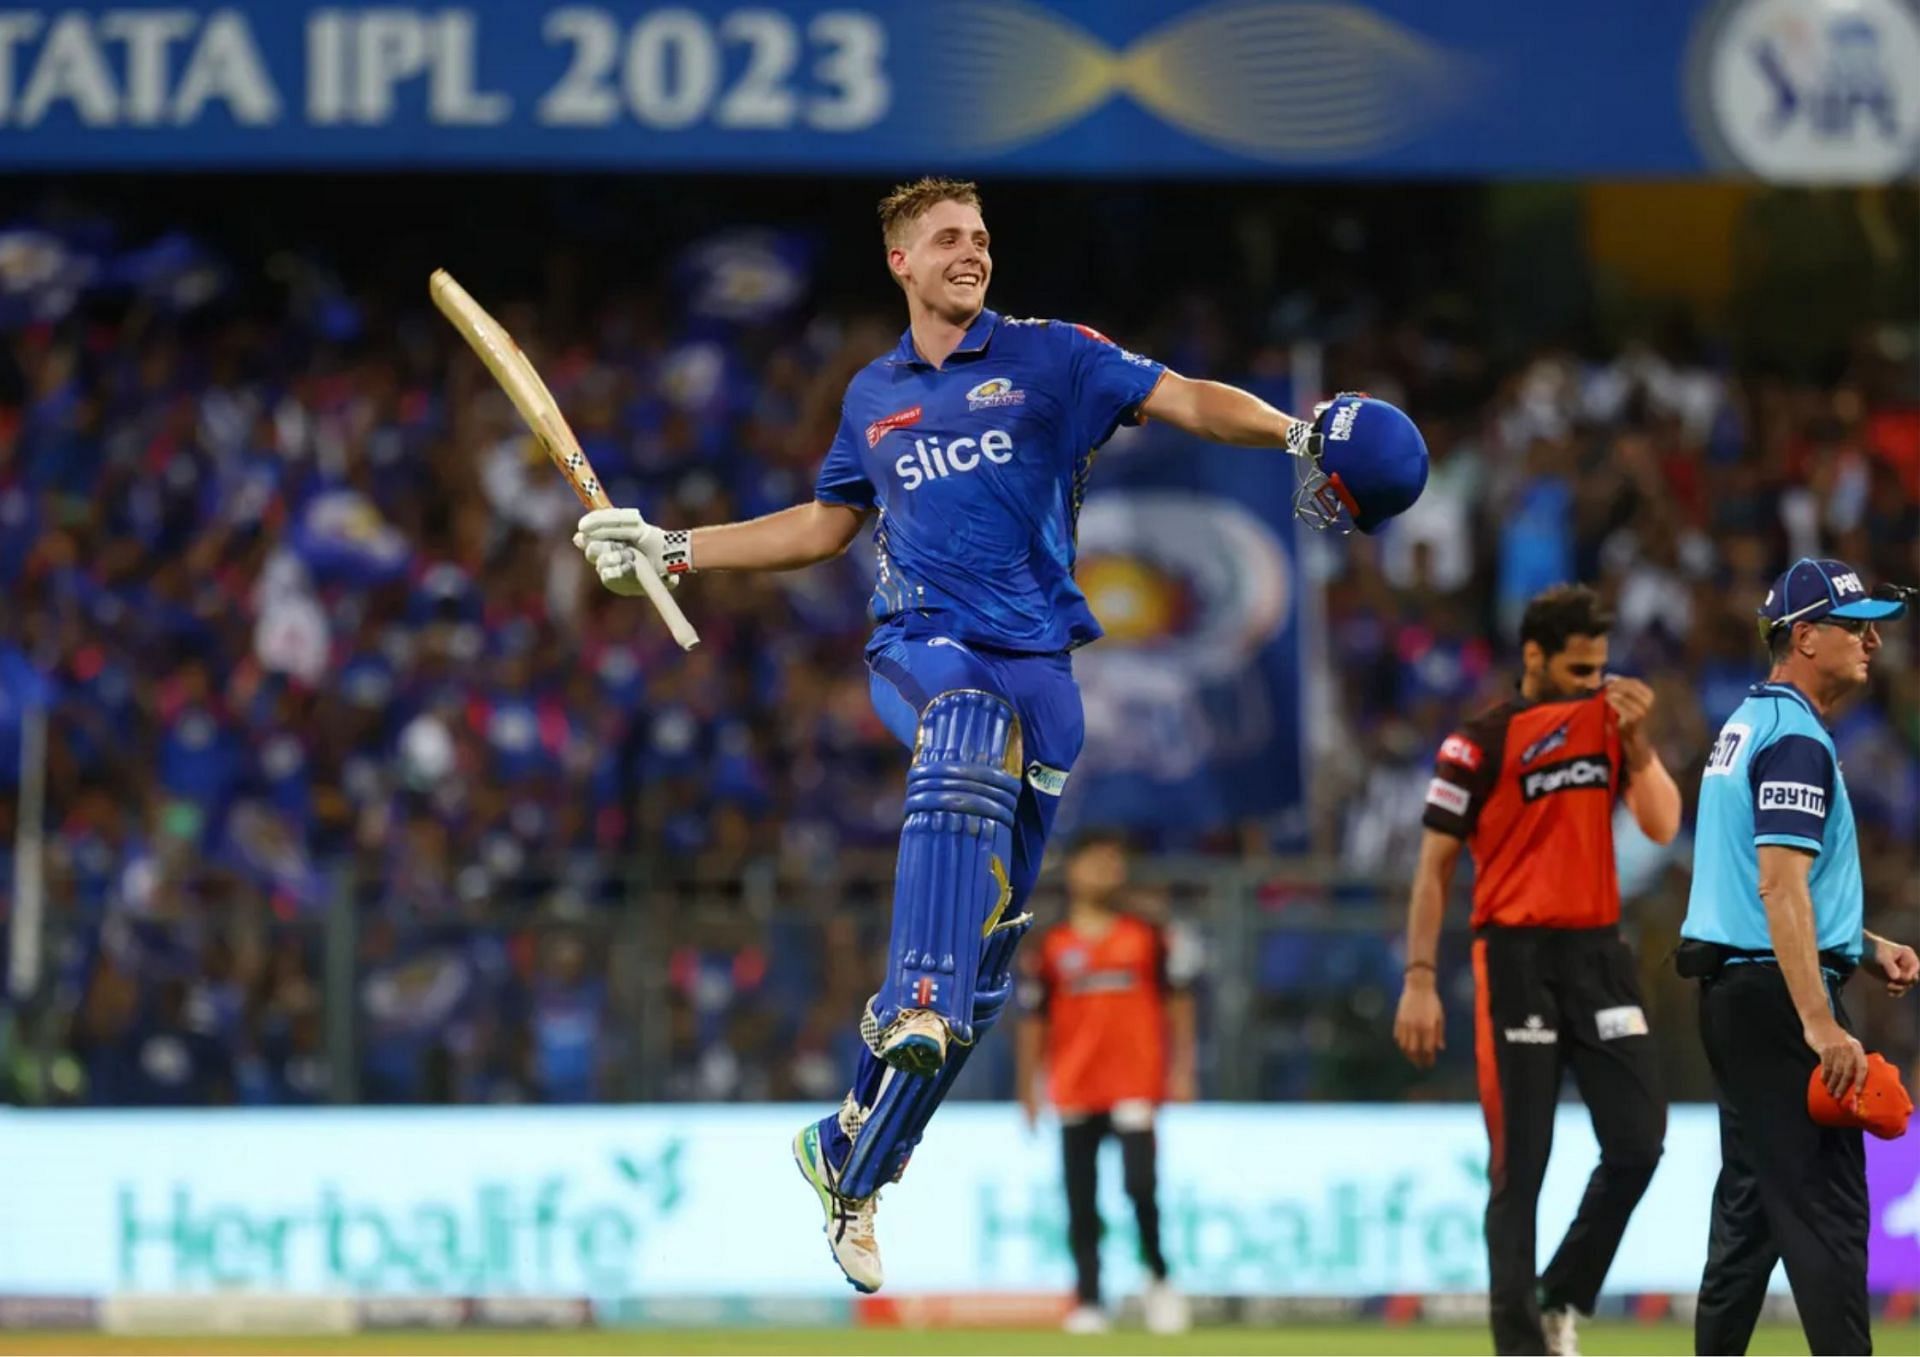 Having worn the blue of MI, Cameron Green will now don the red of RCB for IPL 2024 (Picture Credits: BCCI).